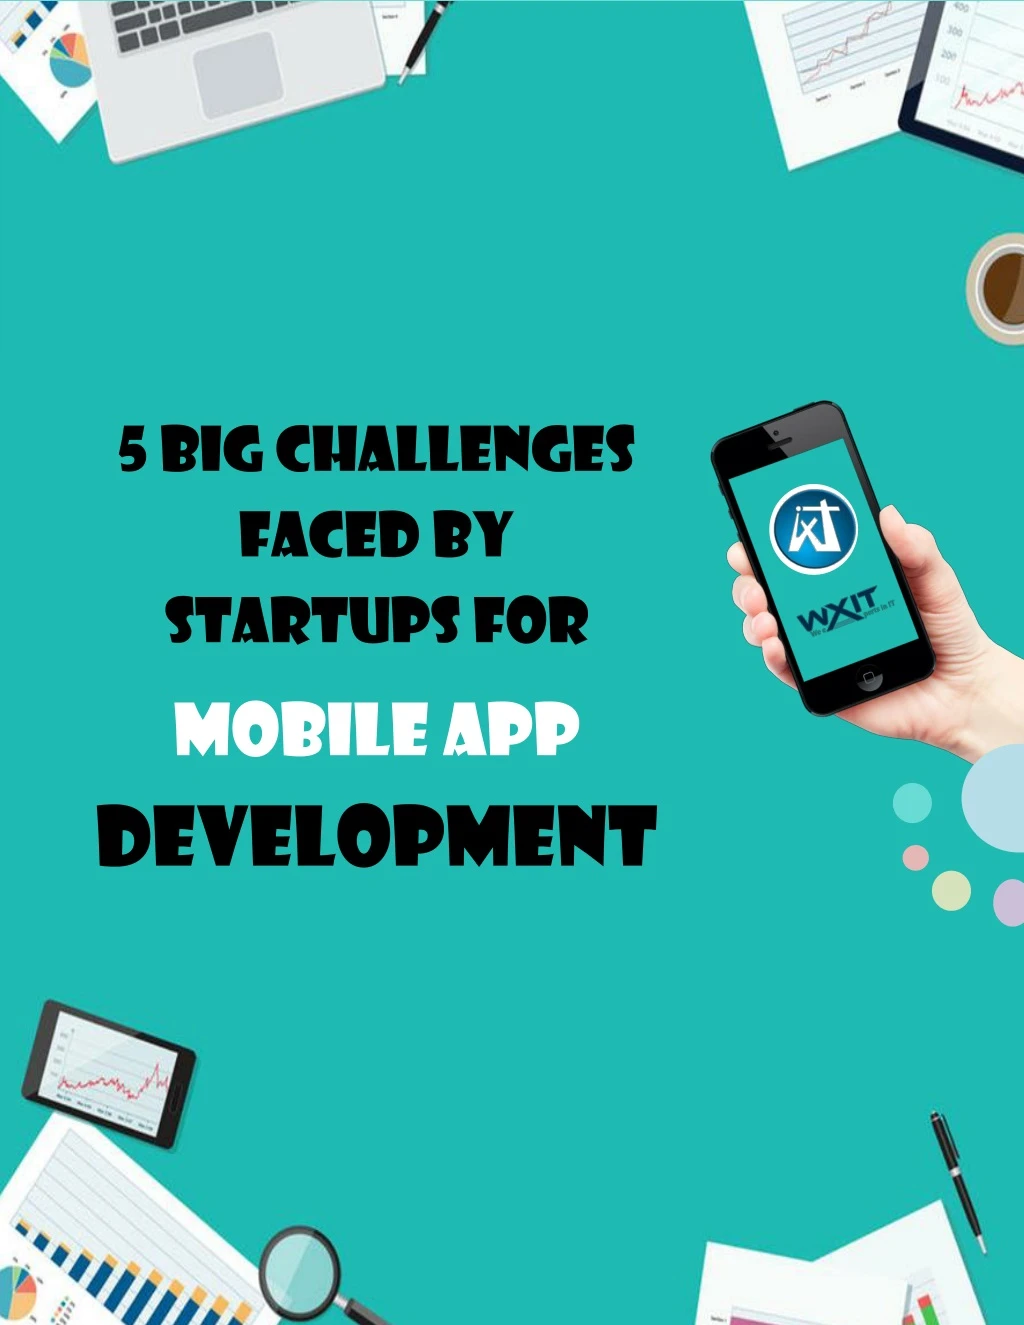 5 big challenges faced by startups for